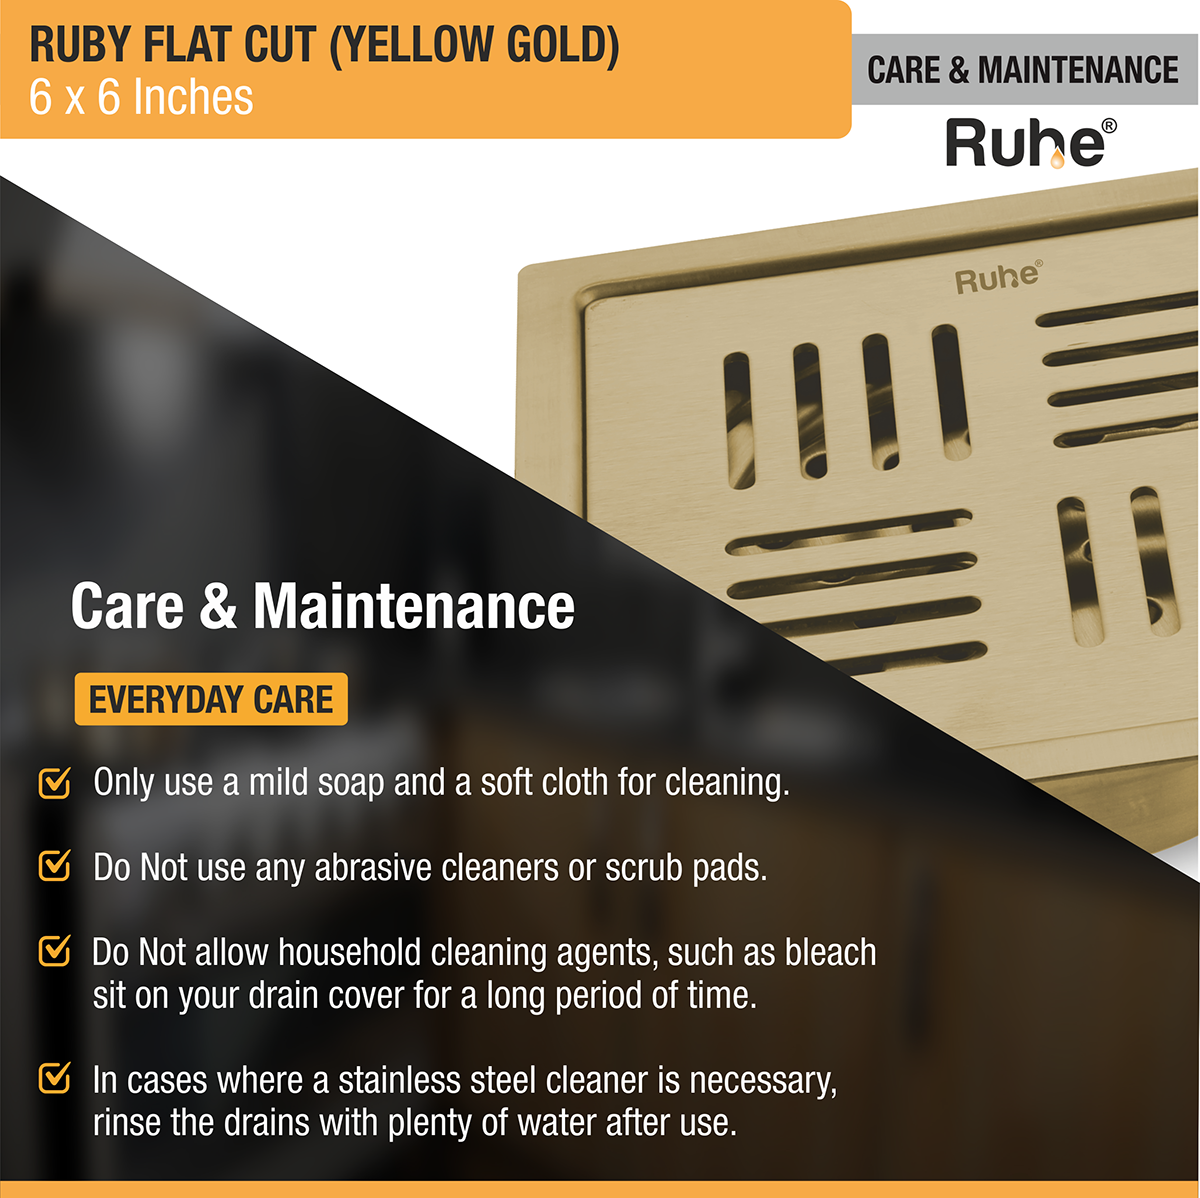 Ruby Square Flat Cut Floor Drain in Yellow Gold PVD Coating (6 x 6 Inches) care and maintenance